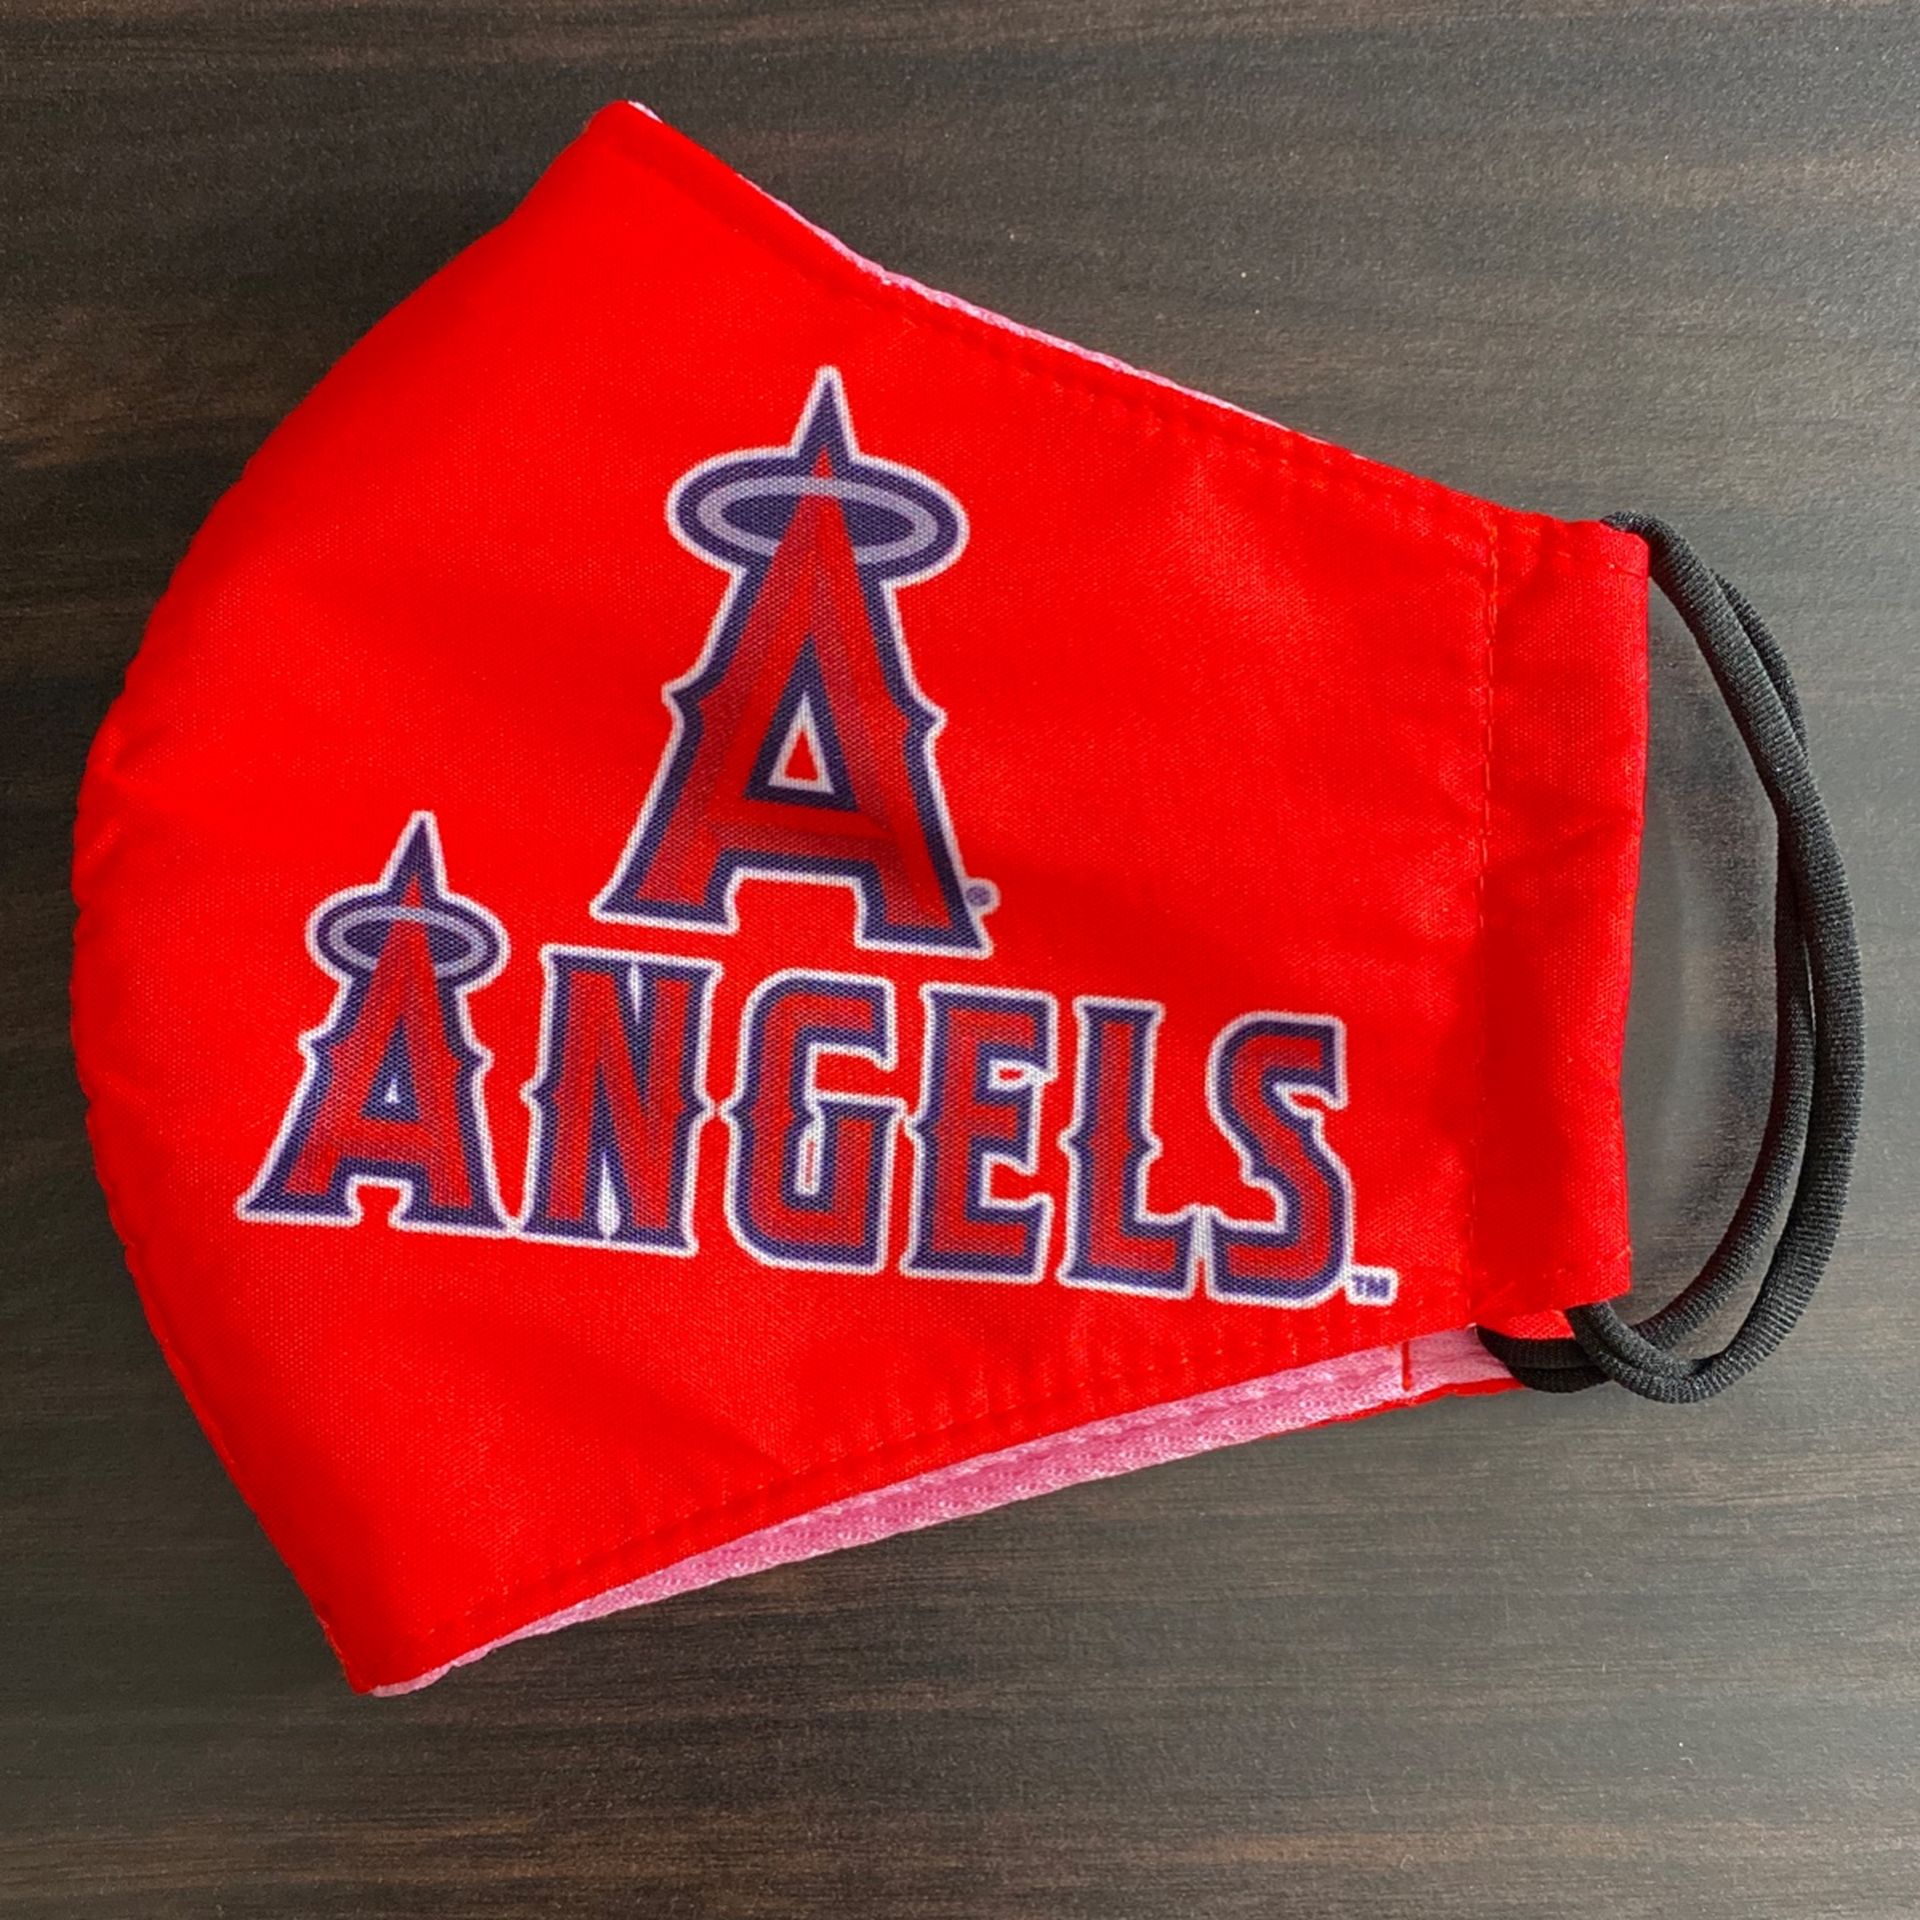 Angels Anaheim Face Mask Adult Size New